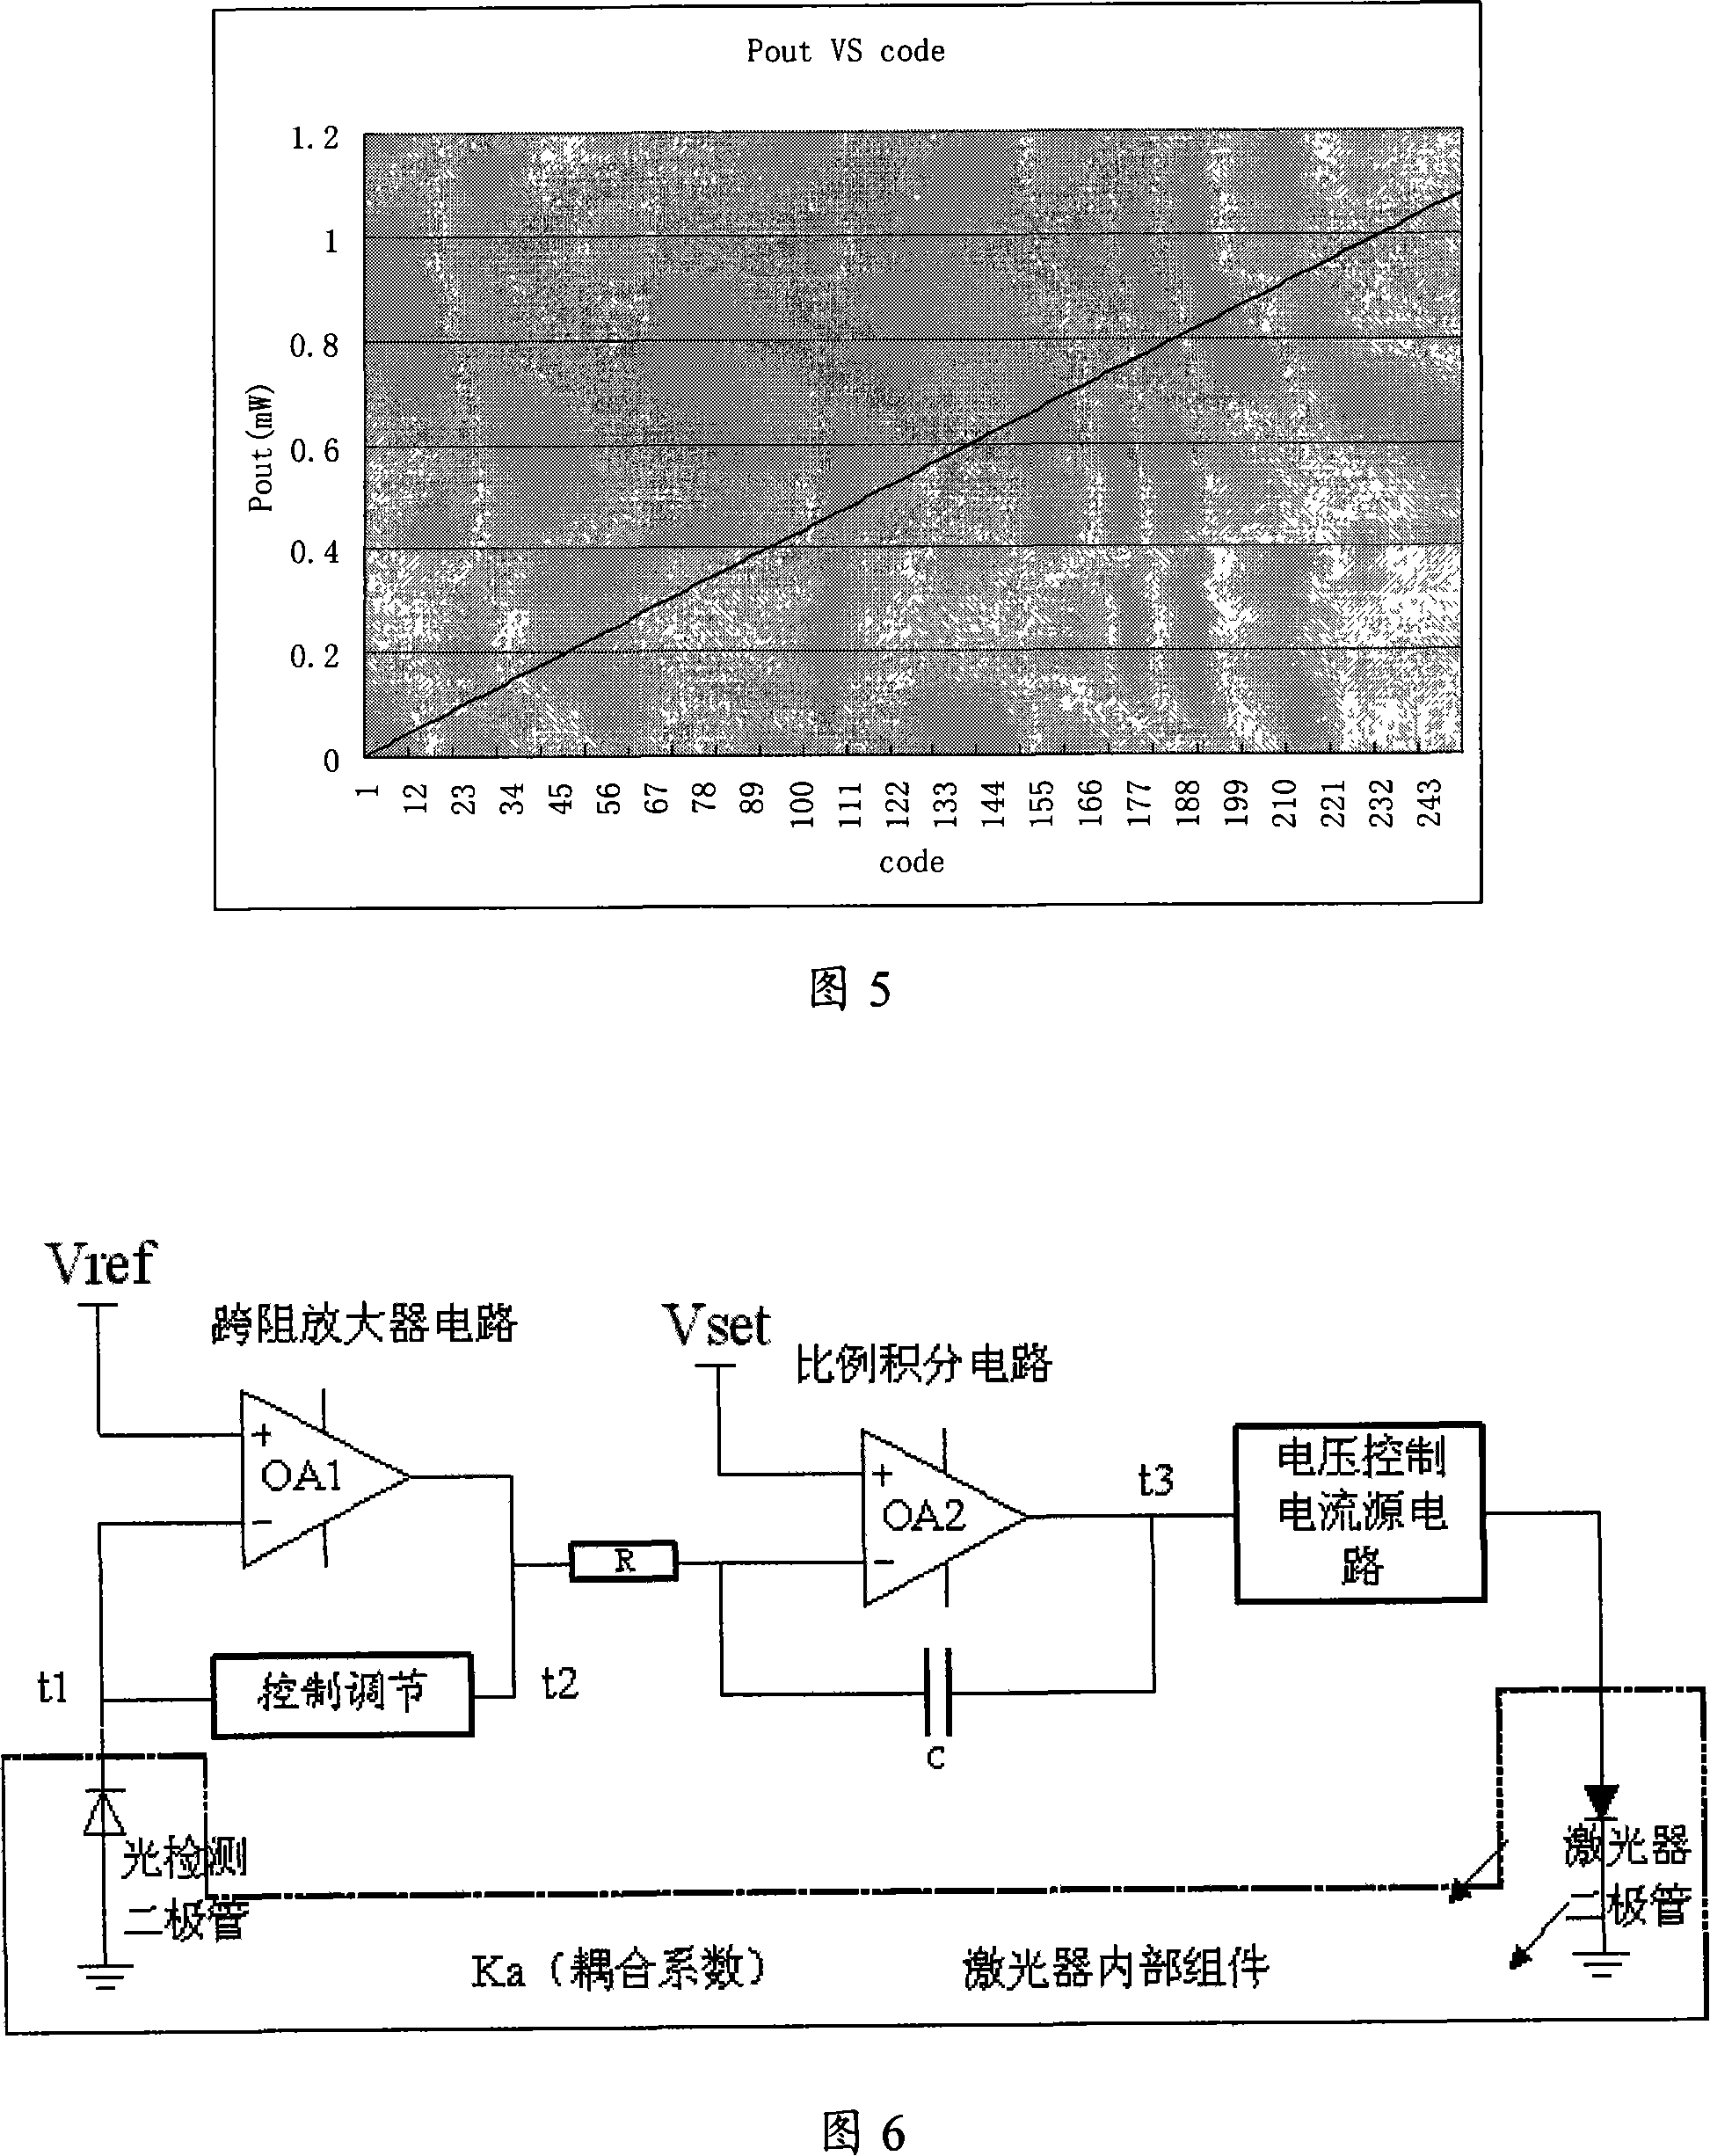 Laser automatic optical power control circuit